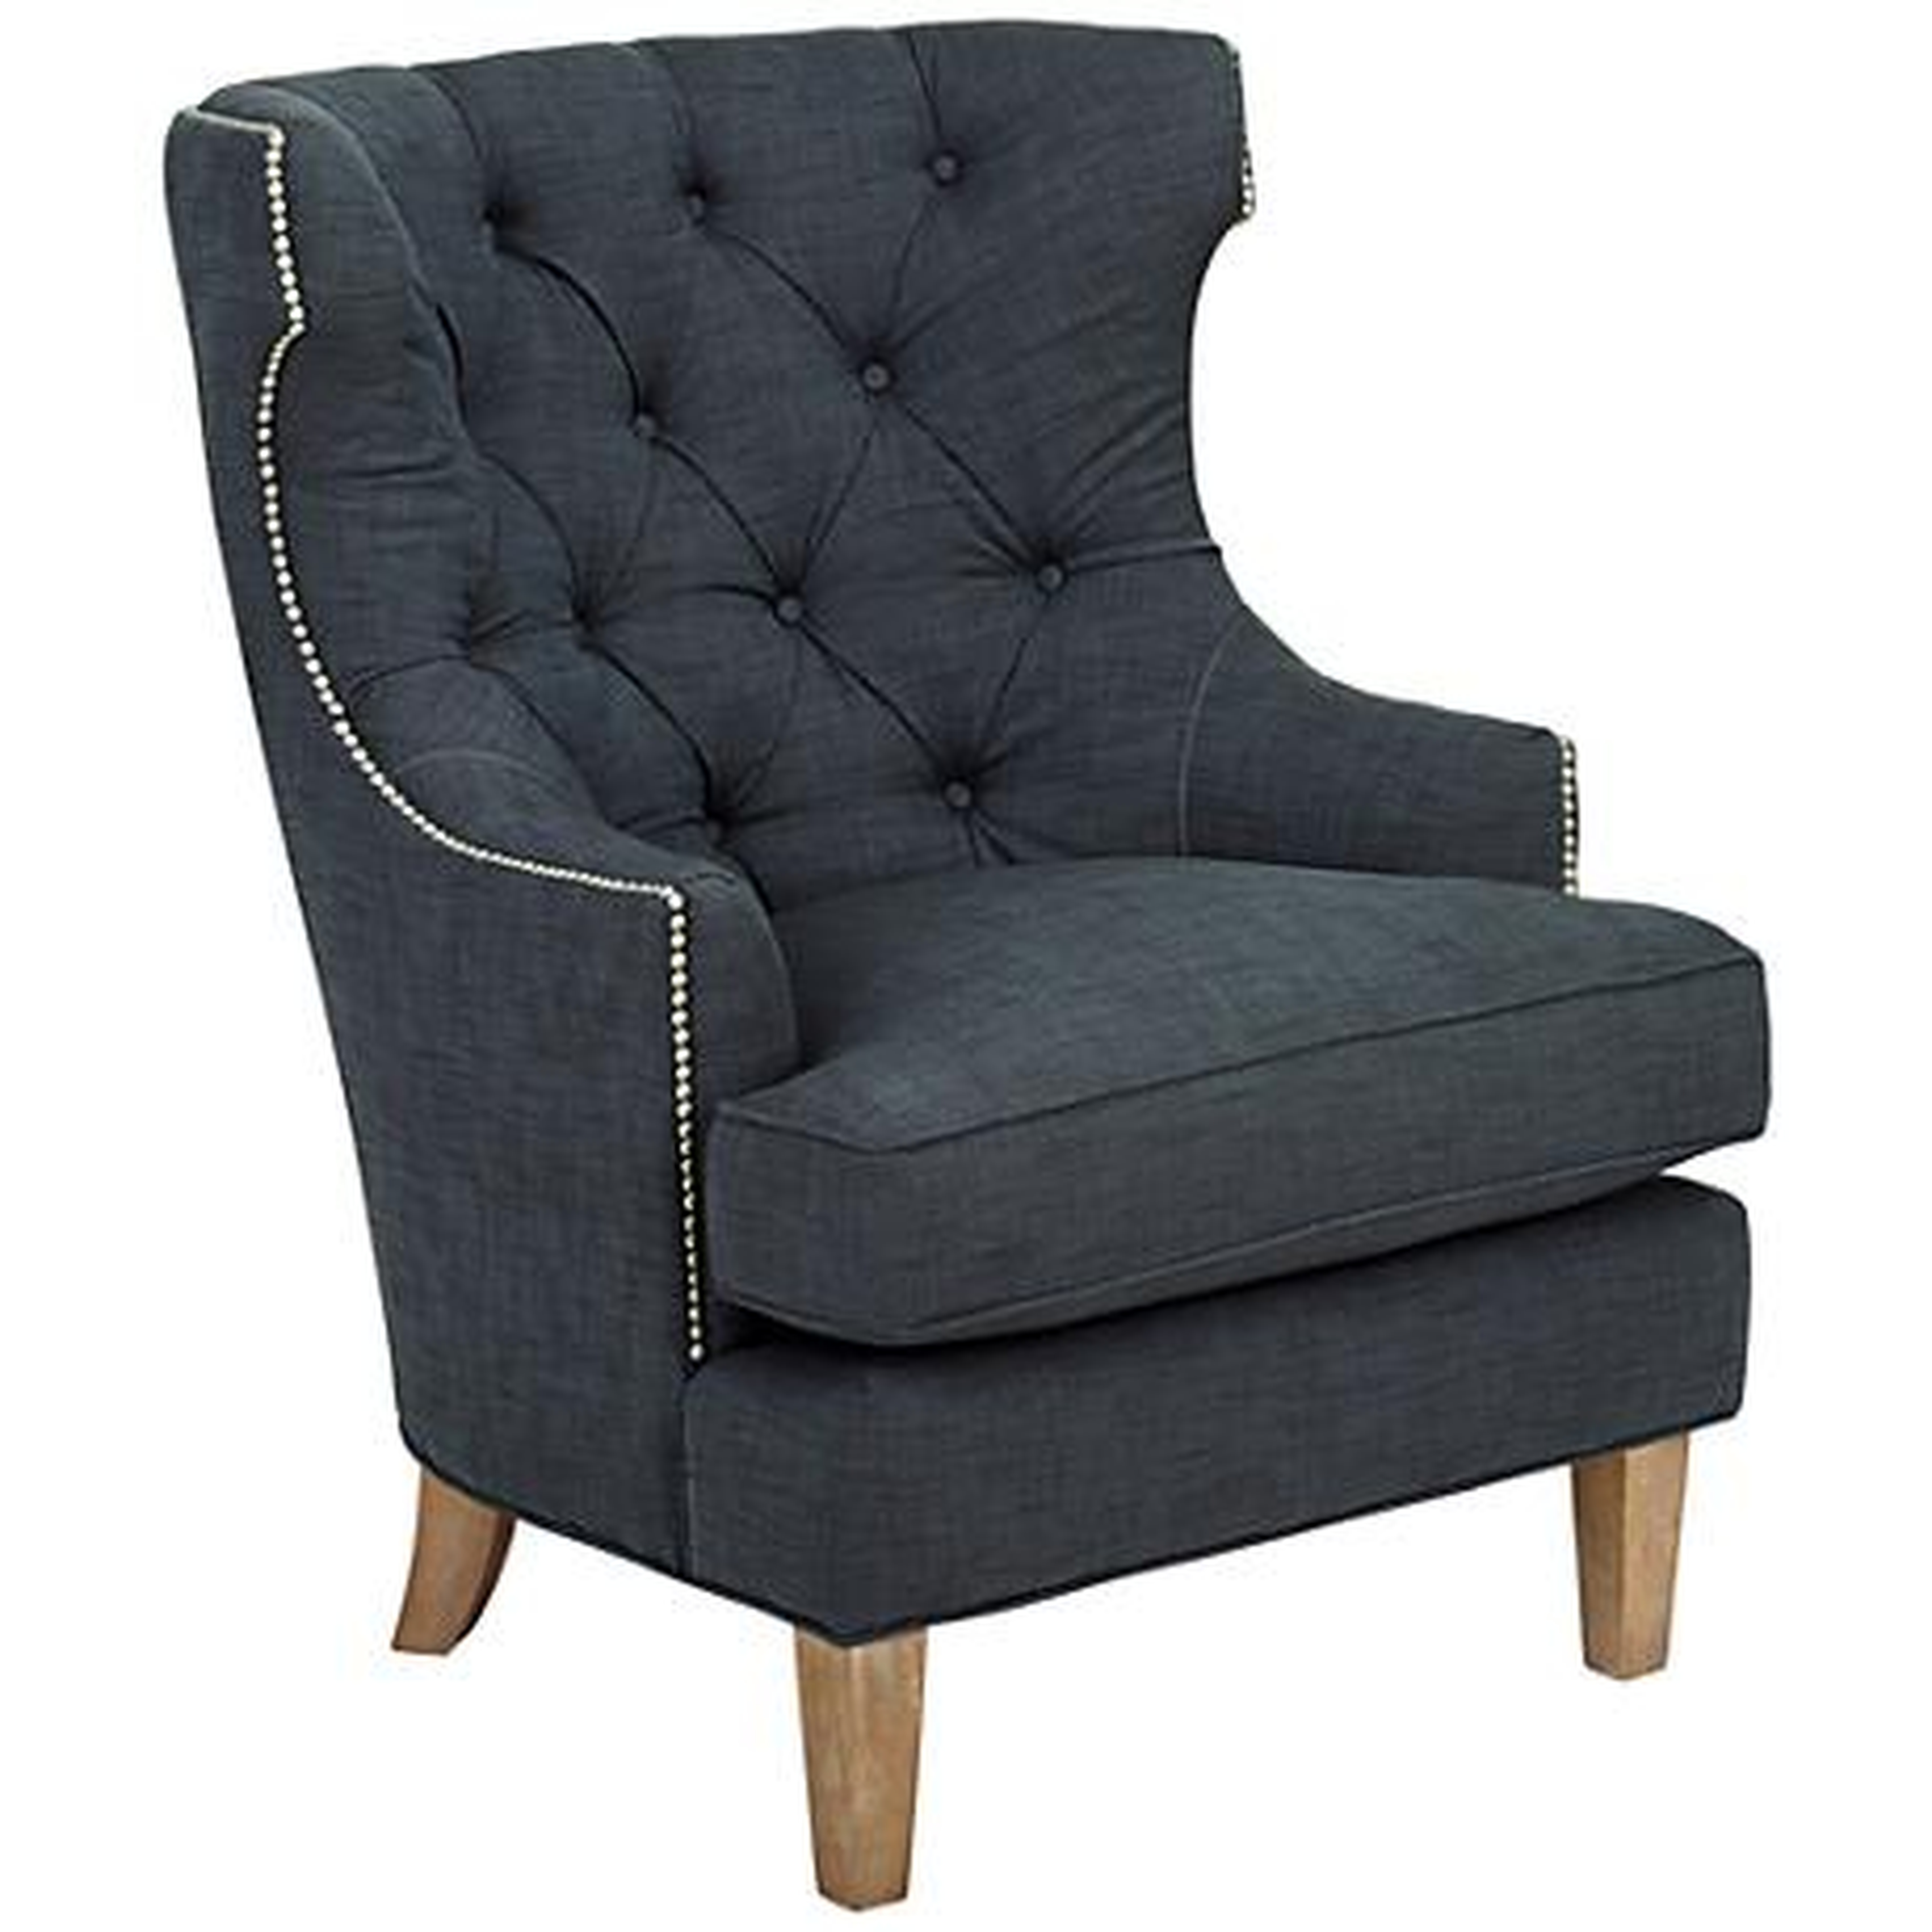 Reese Studio Indigo High-Back Accent Chair - Lamps Plus